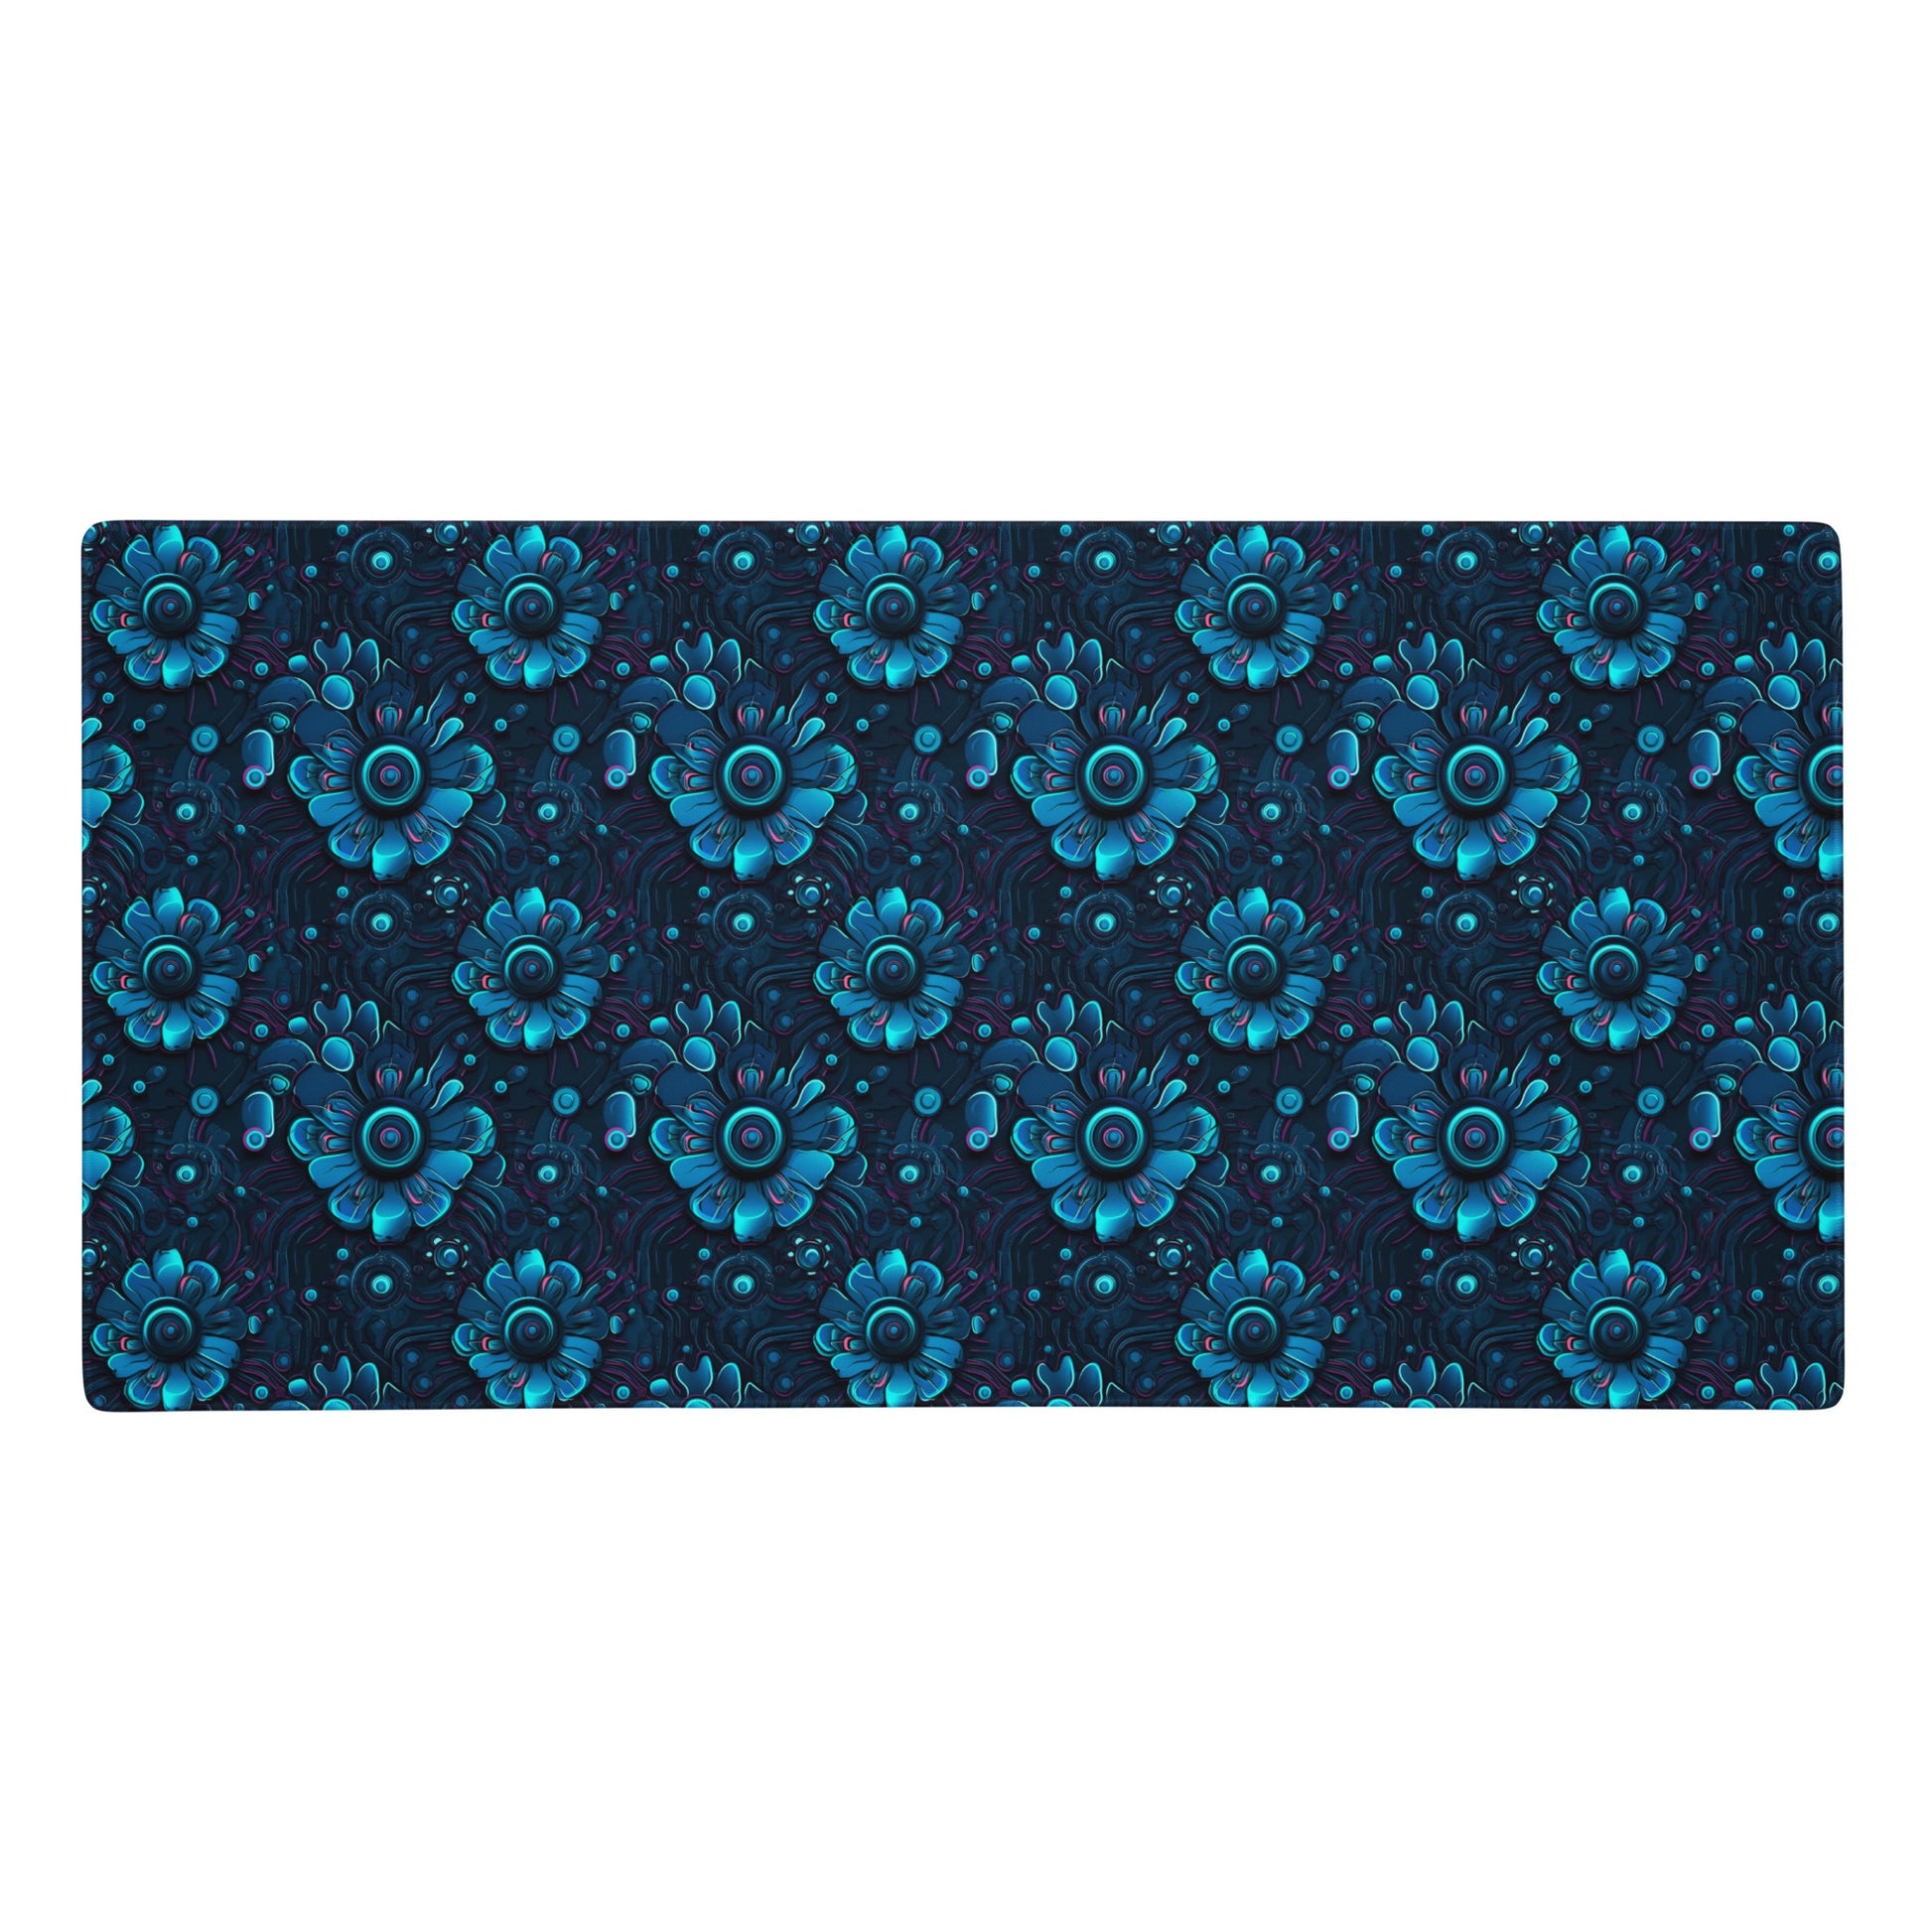 A 36" x 18" desk pad with a blue robotic floral pattern.